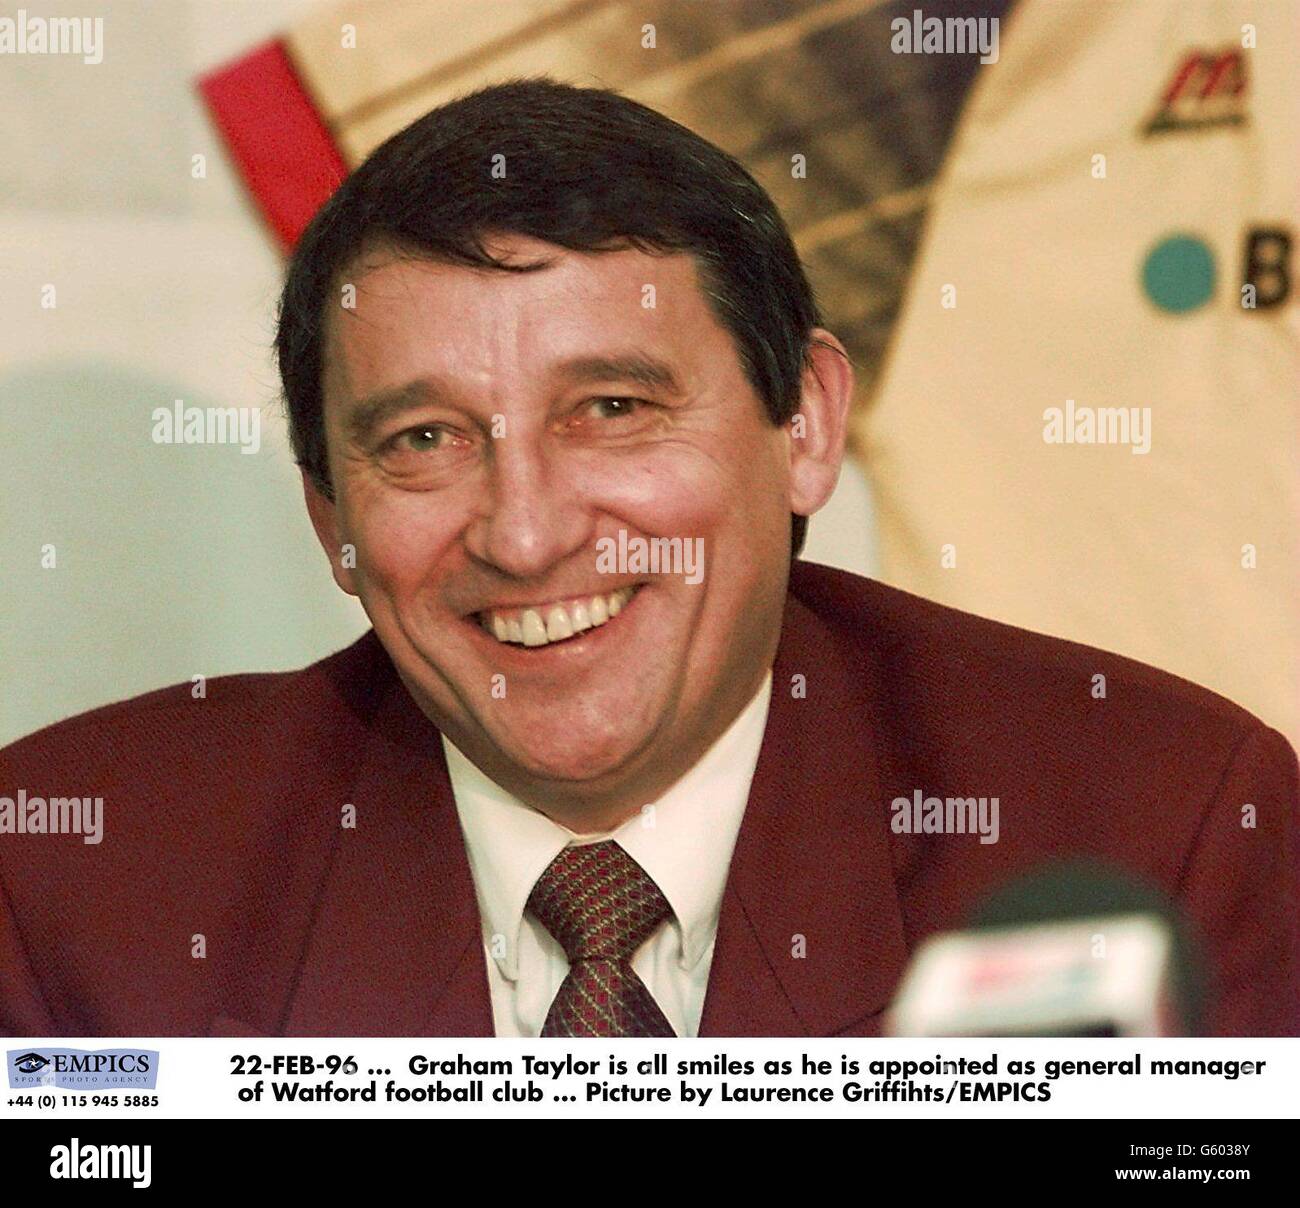 22-FEB-96. Graham Taylor is all smiles as he is appointed as General Manager of Watford Football Club. Picture by Laurence Griffiths/EMPICS Stock Photo